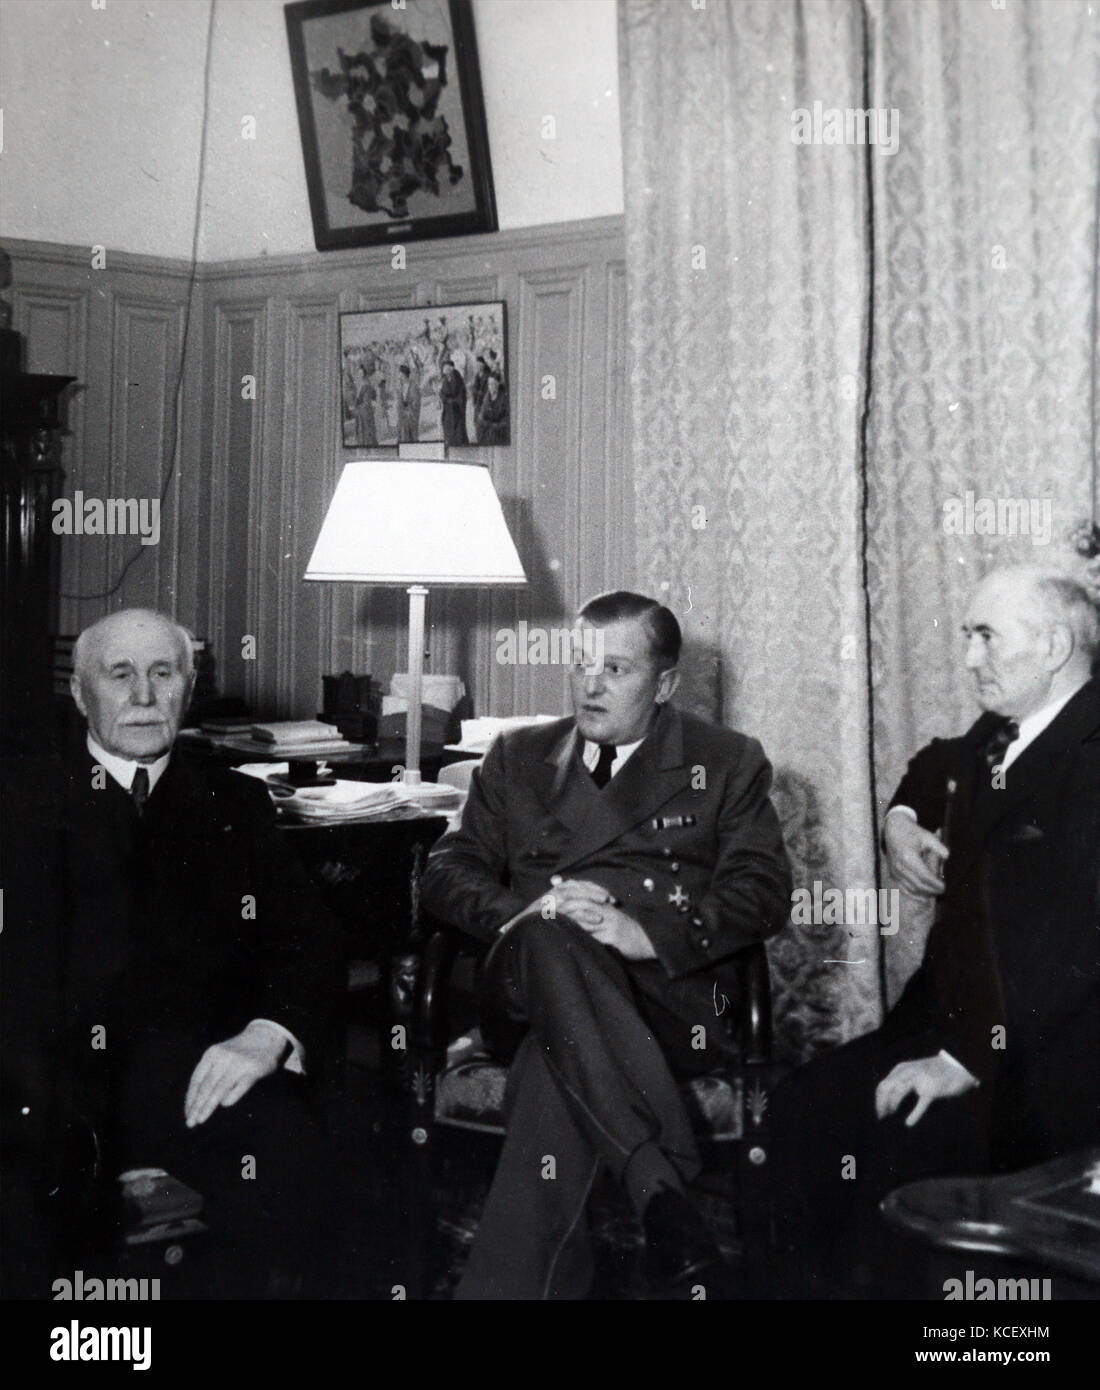 Photograph of leaders meeting in Vichy France: Marshal Philippe Petain (left), Admiral Francois Darlan (right), with the German ambassador, Otto Abetz. Dated 20th Century Stock Photo